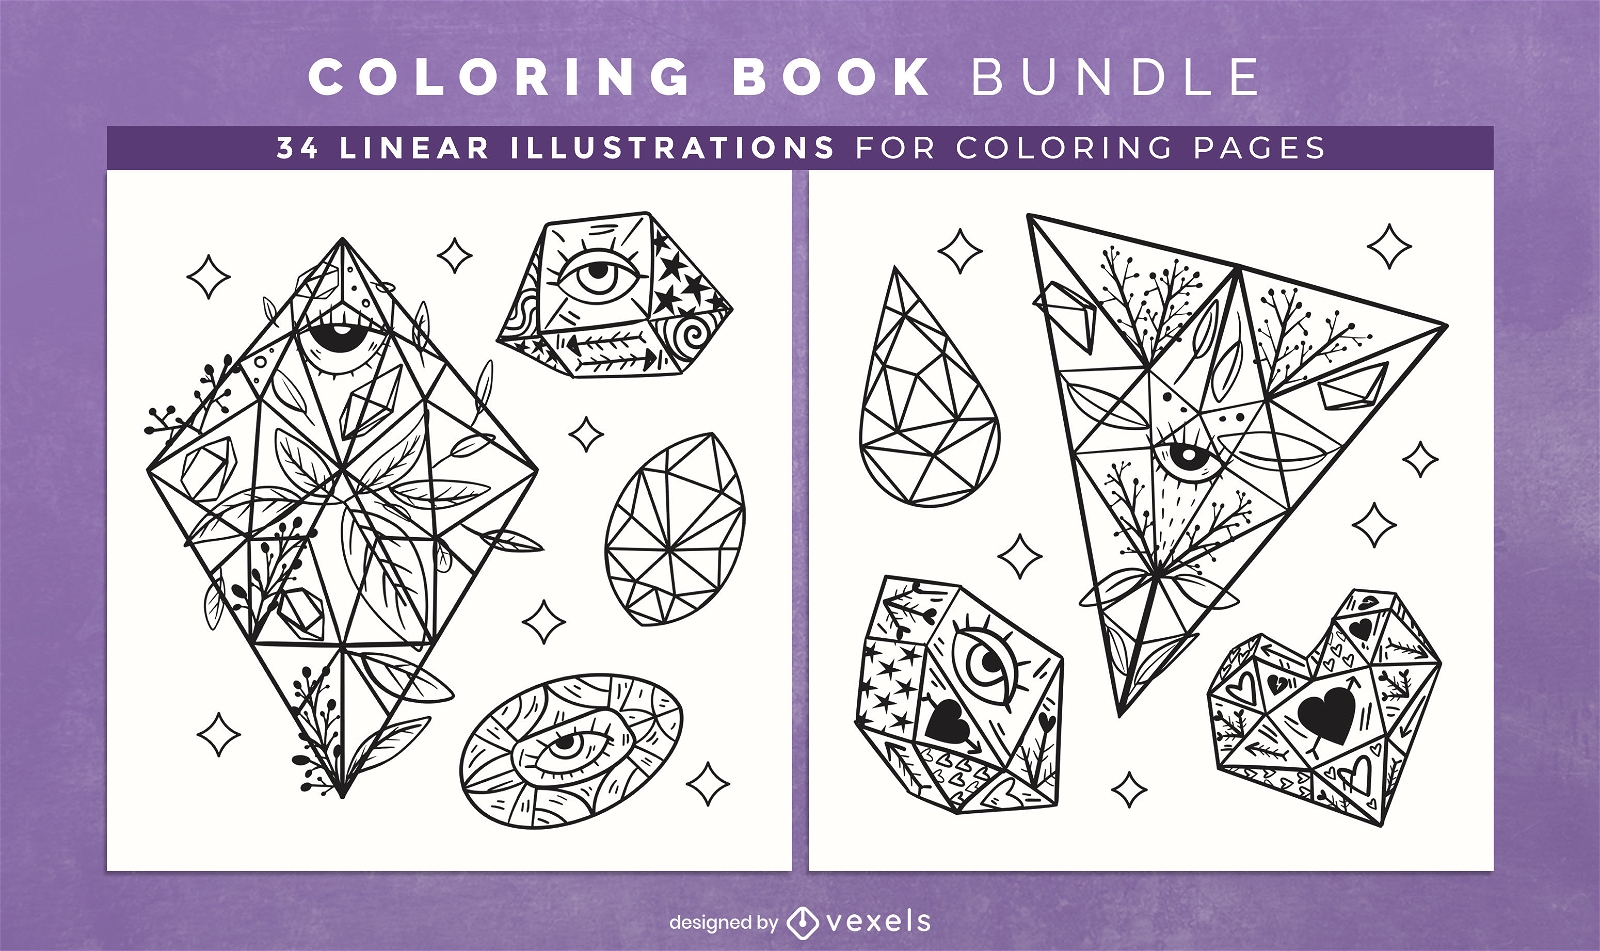 Crystals with eyes coloring book design pages